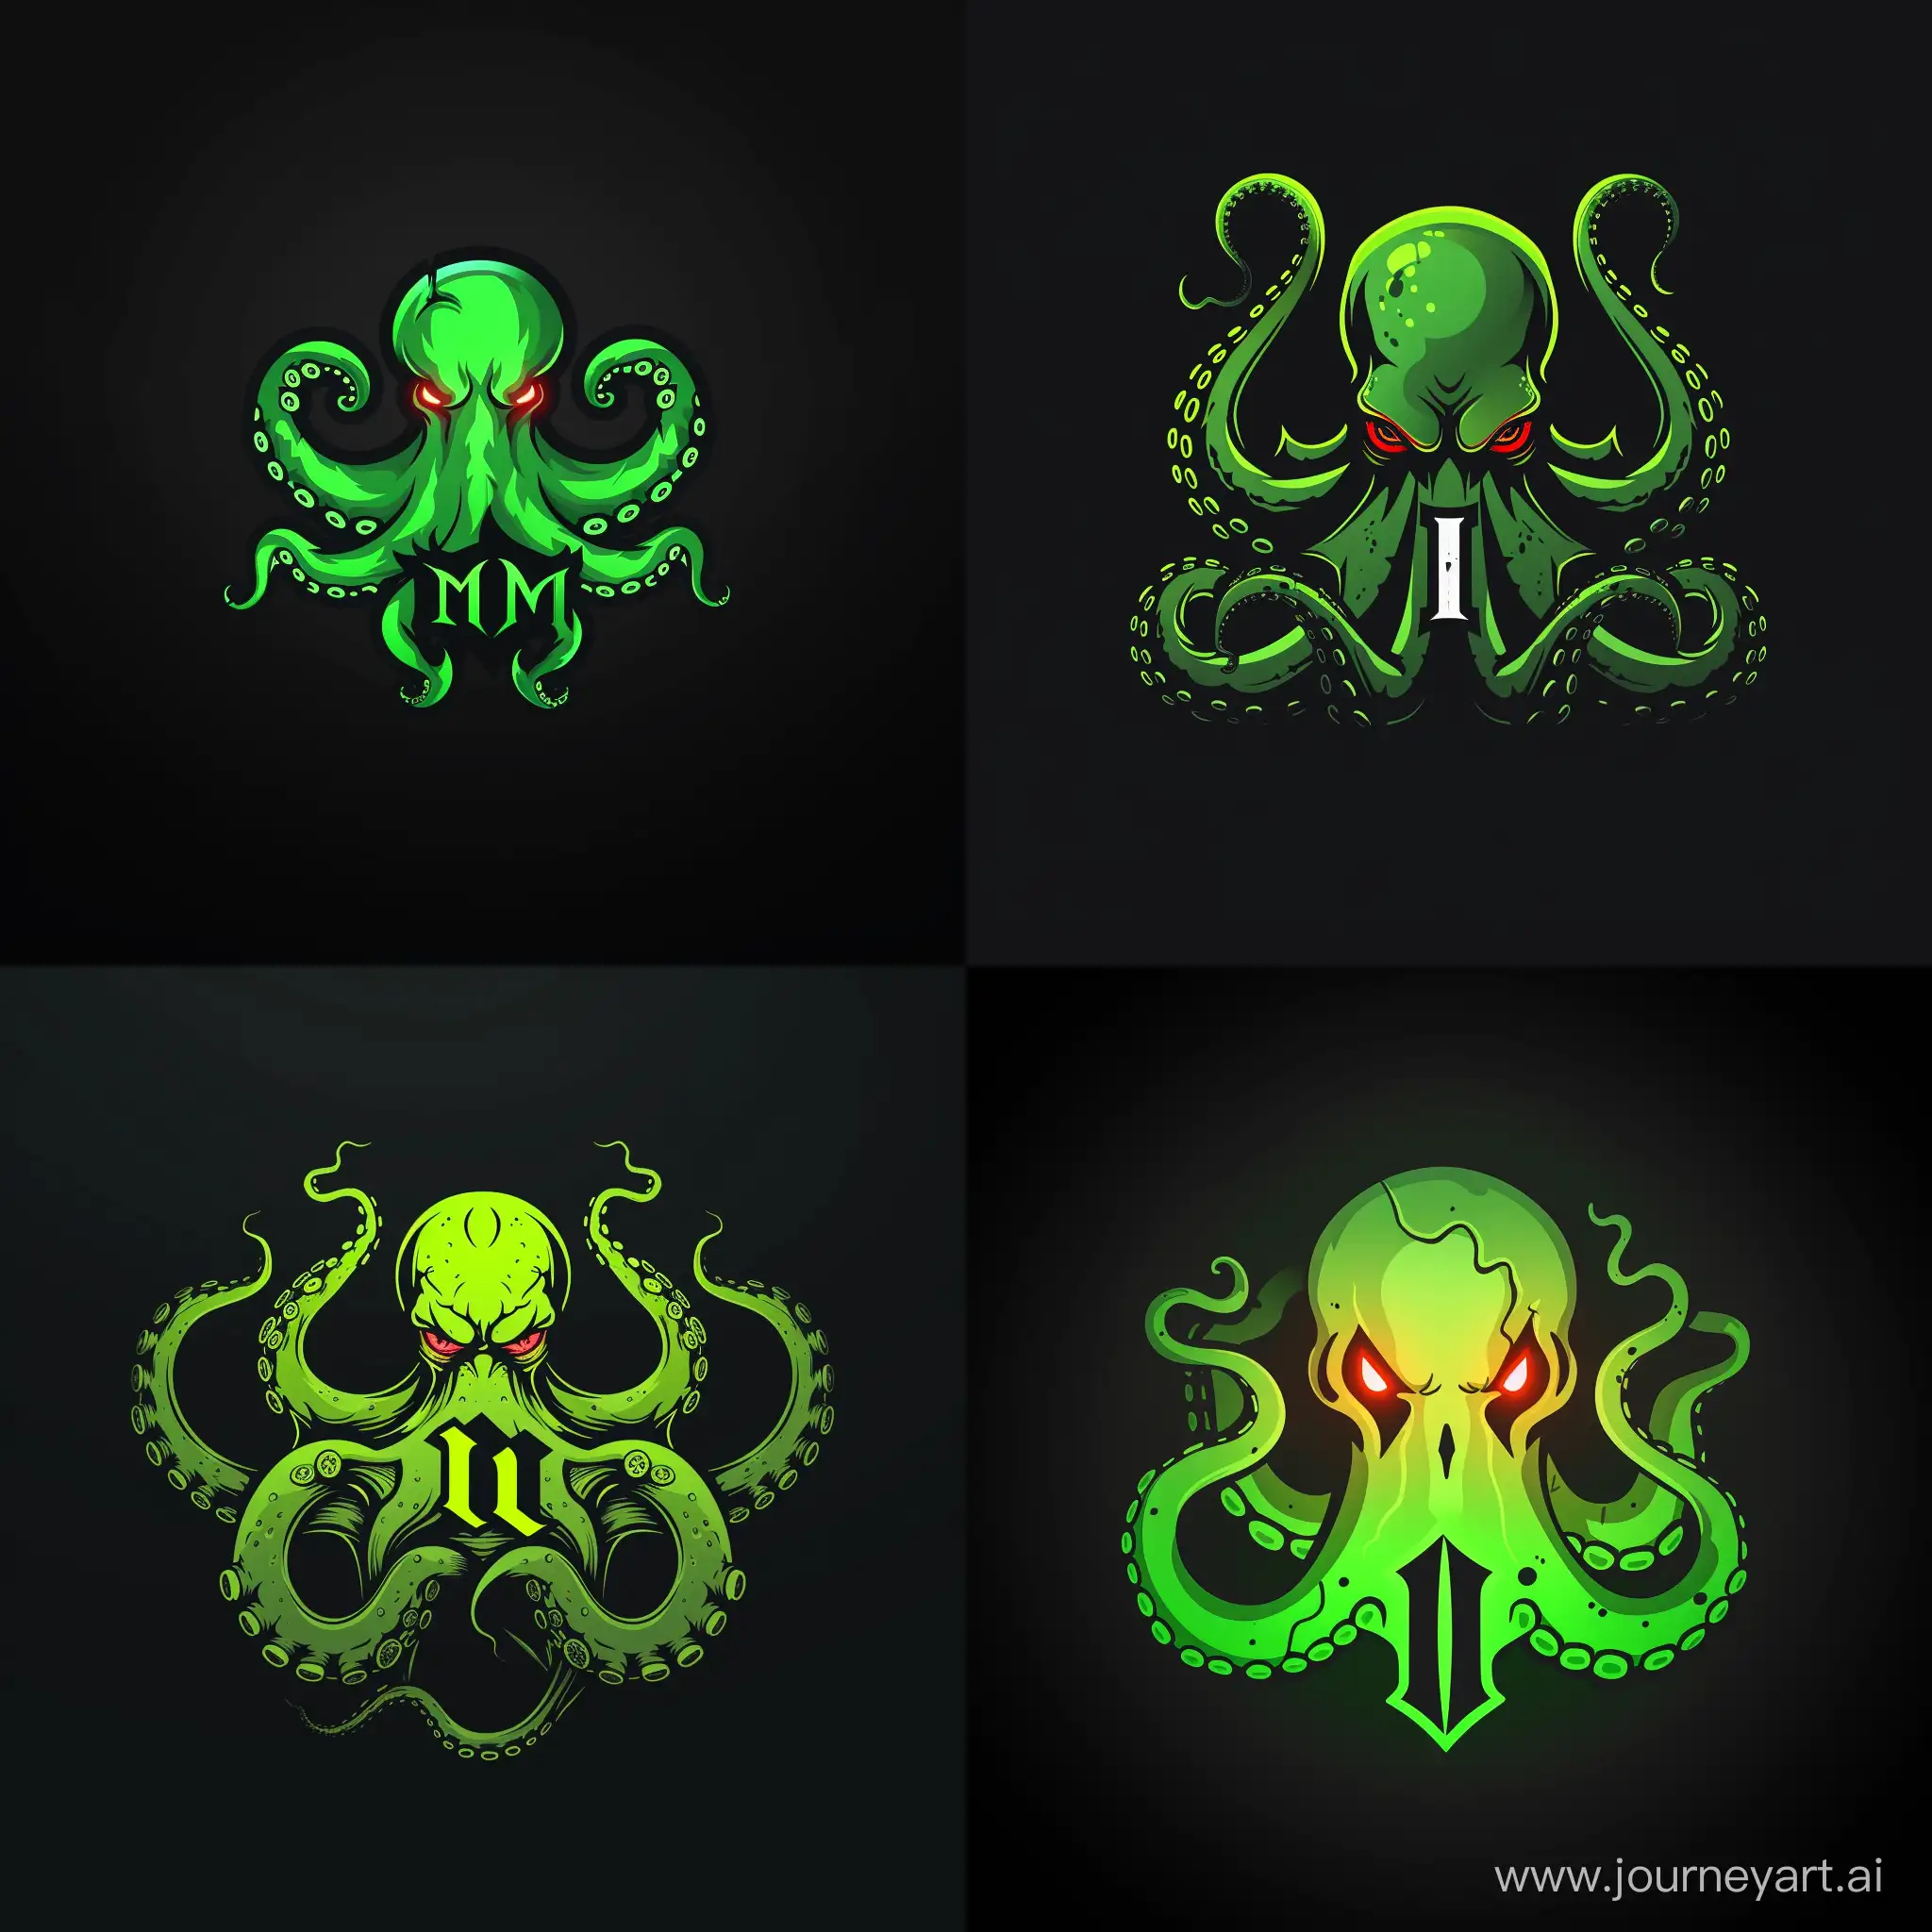 Minimalistic-AcidGreen-Octopus-Logo-with-Angry-Red-Eyes-and-Letter-IM